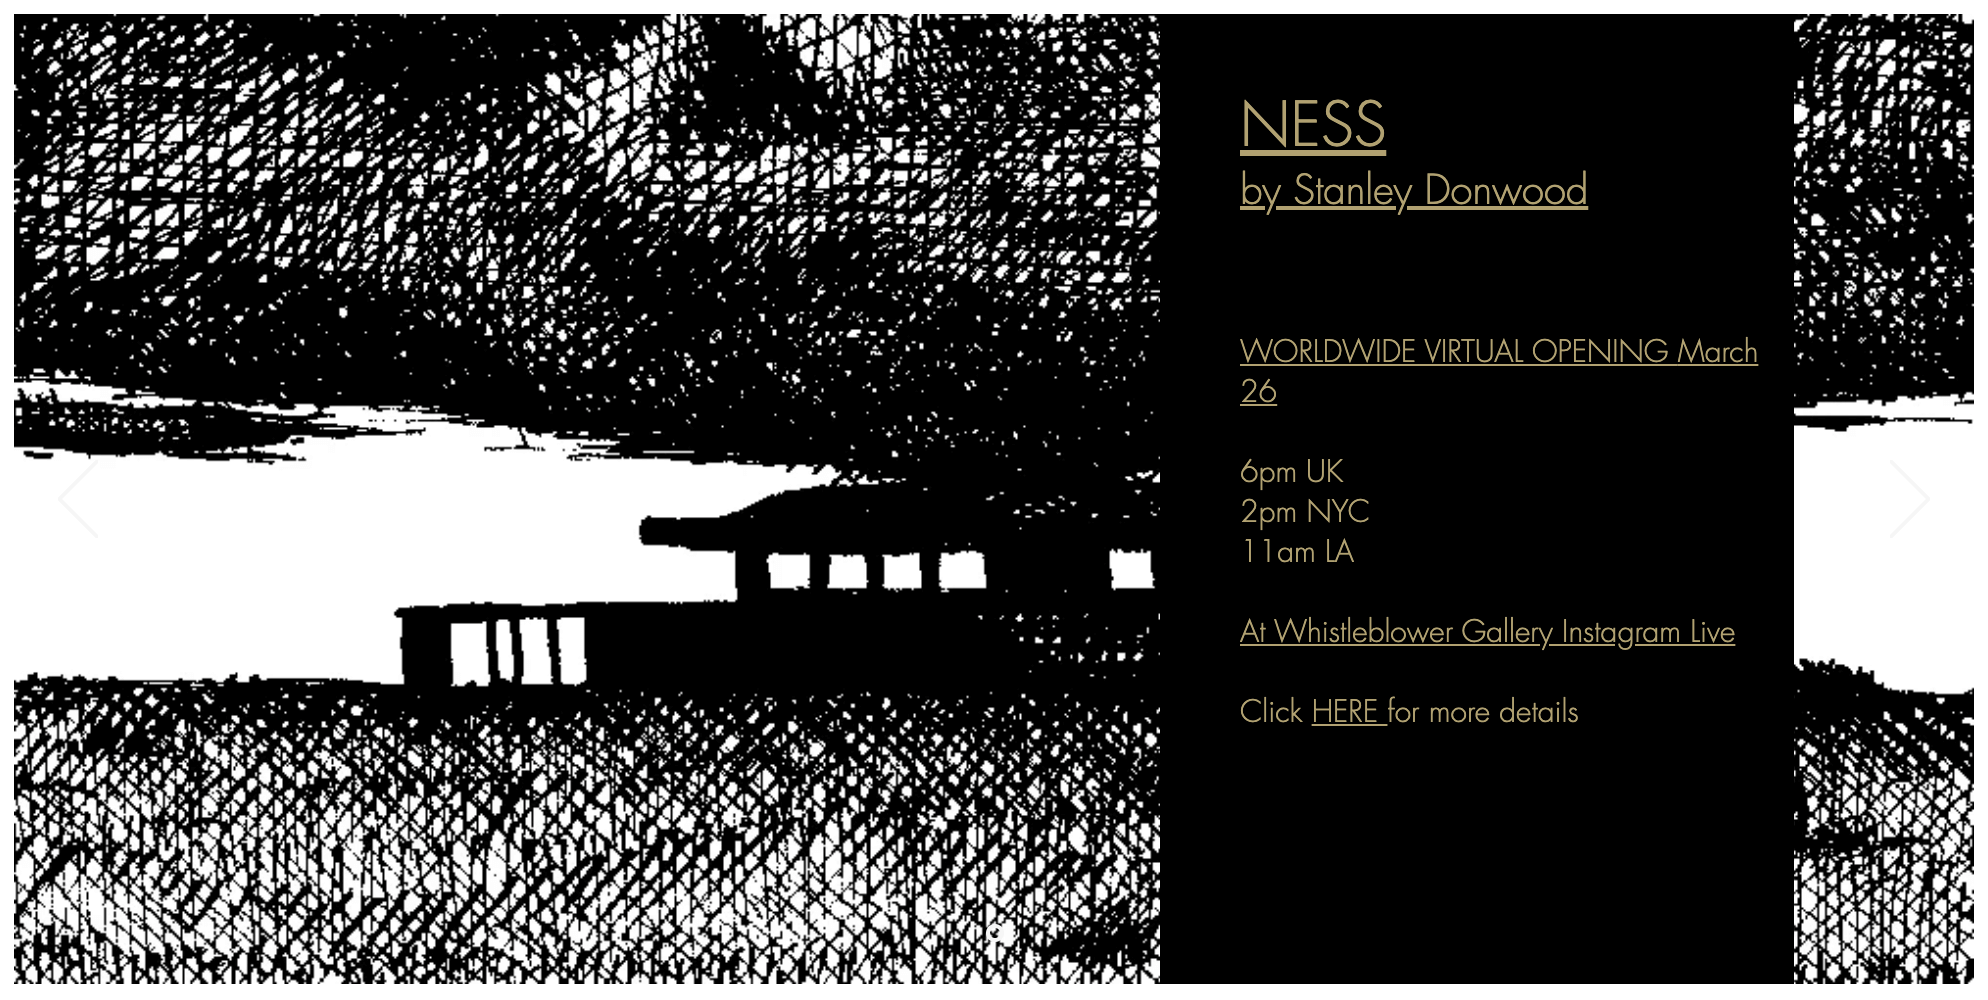 NESS gallery show